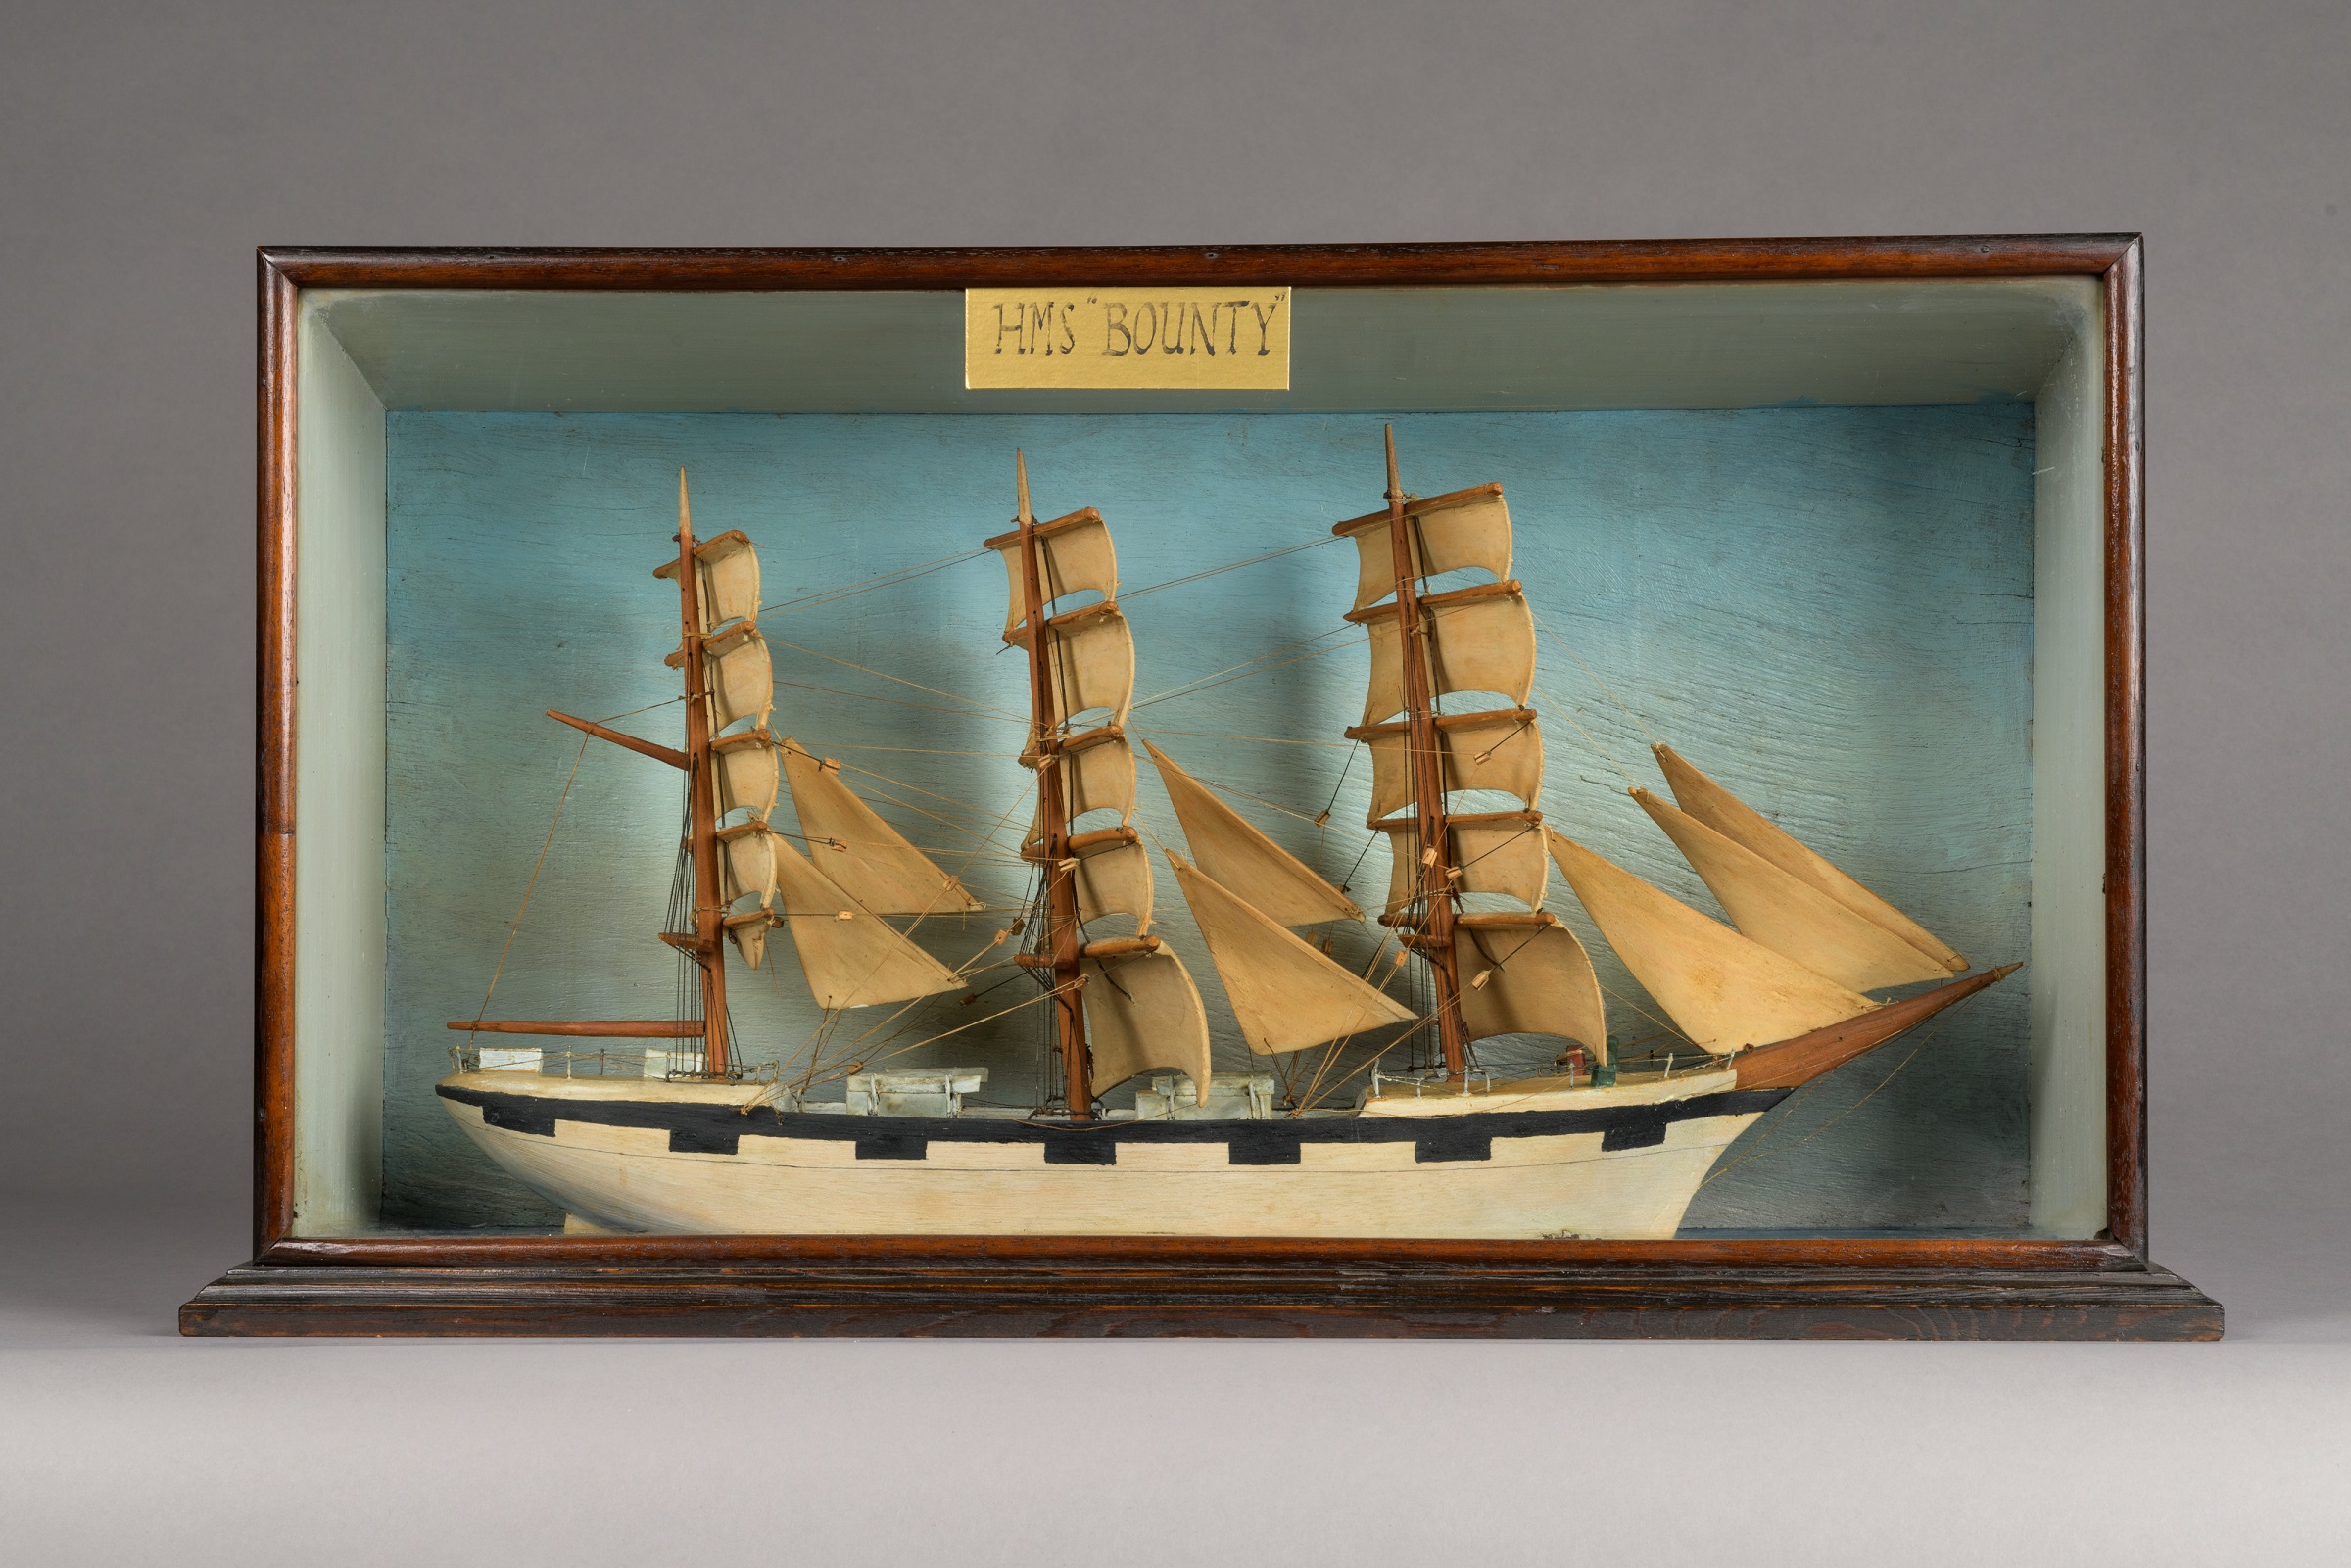 A photo of the model of the HMS Bounty at Trinity House